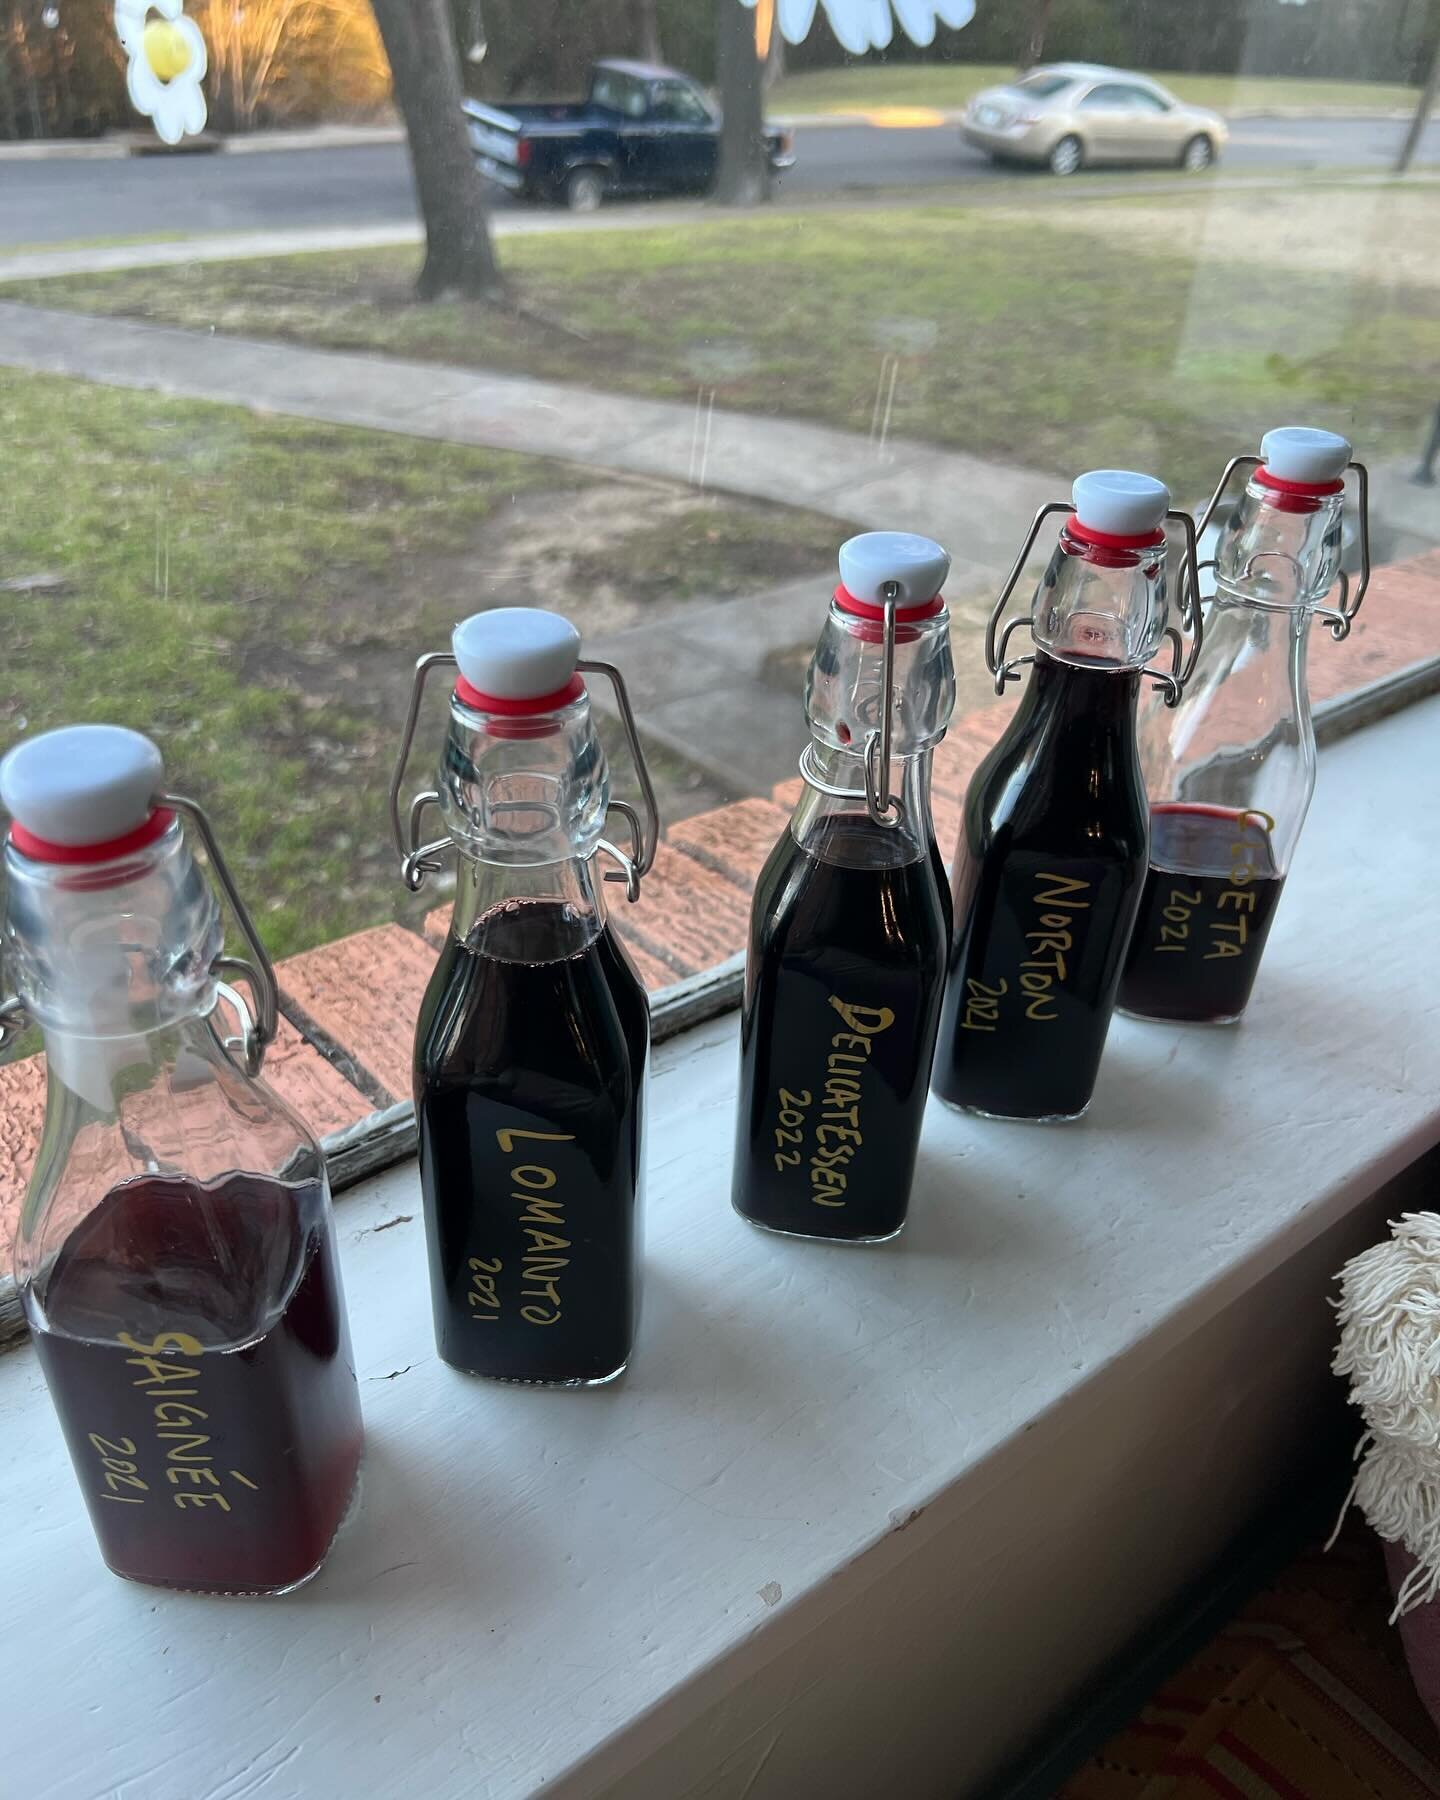 Vinegar Trial Update

We had successful acidification on all five native Texas Grape varietals! Cloeta was our favorite wine, we shall see if it remains our favorite after the vinegar mothers have spoken with it.

Taste testing soon! (Though we&rsquo